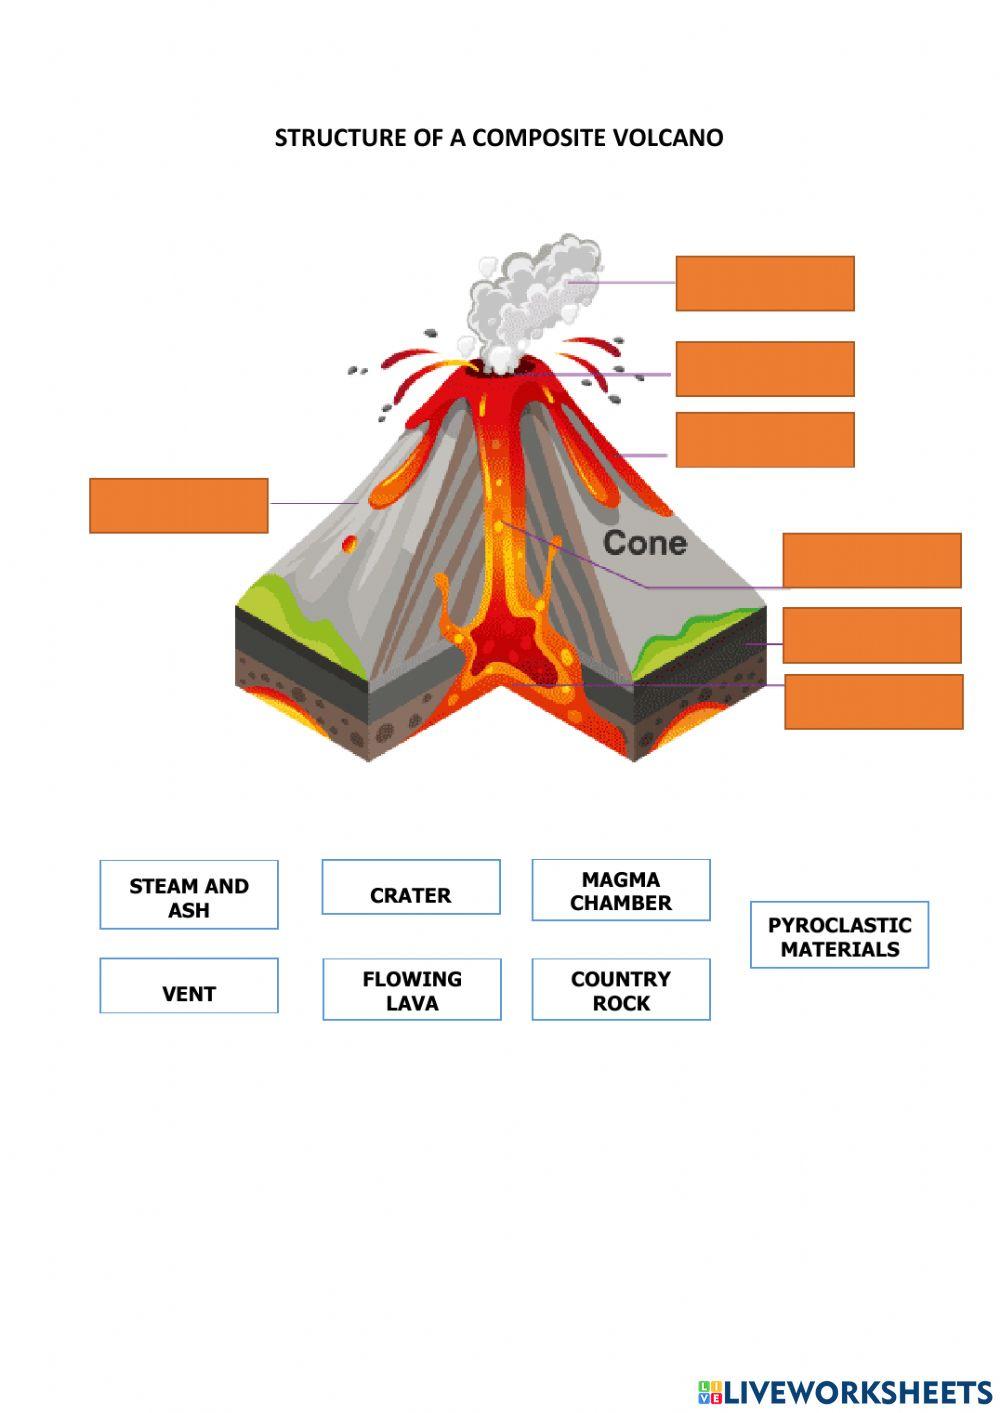 Structure of composite volcano